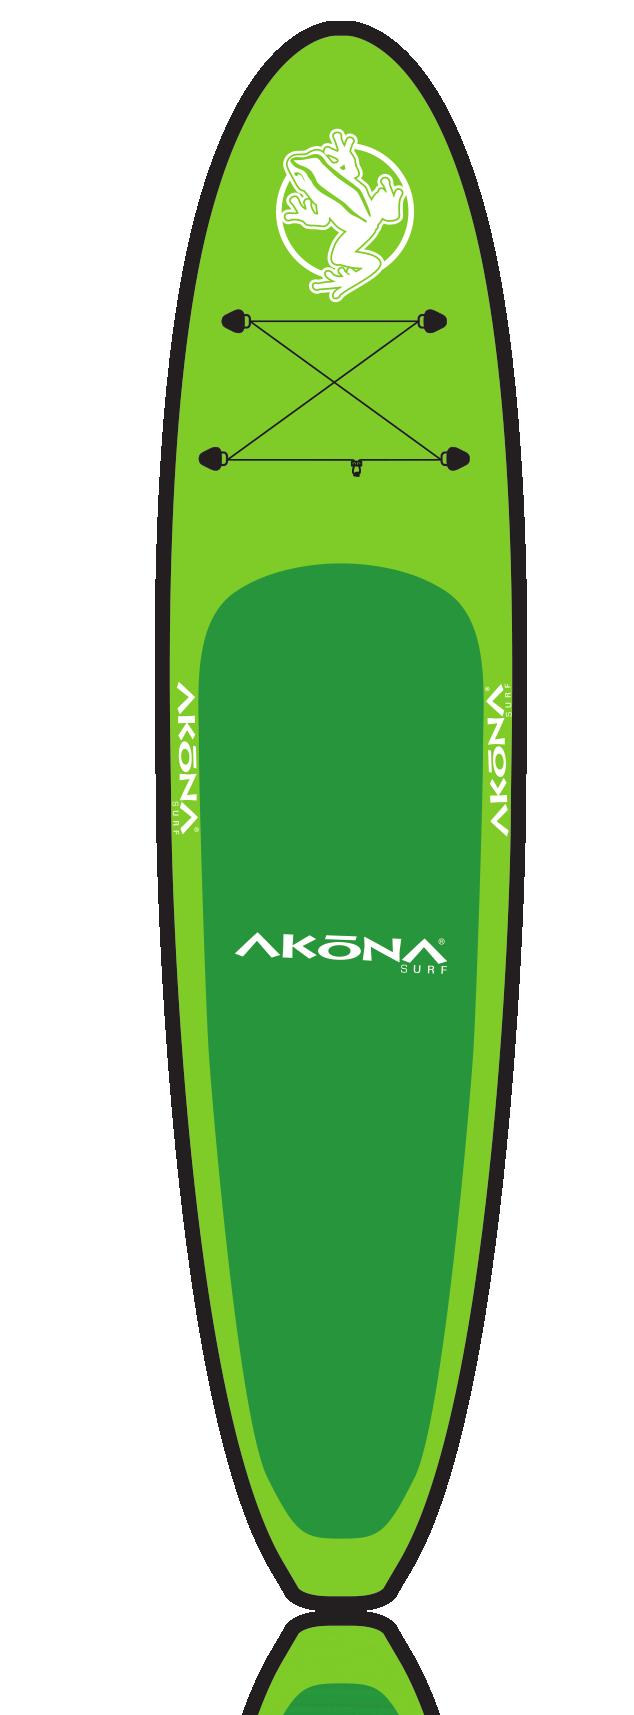 Whether you need a board for the cabin, rental, yoga, adults, kids this is your answer!